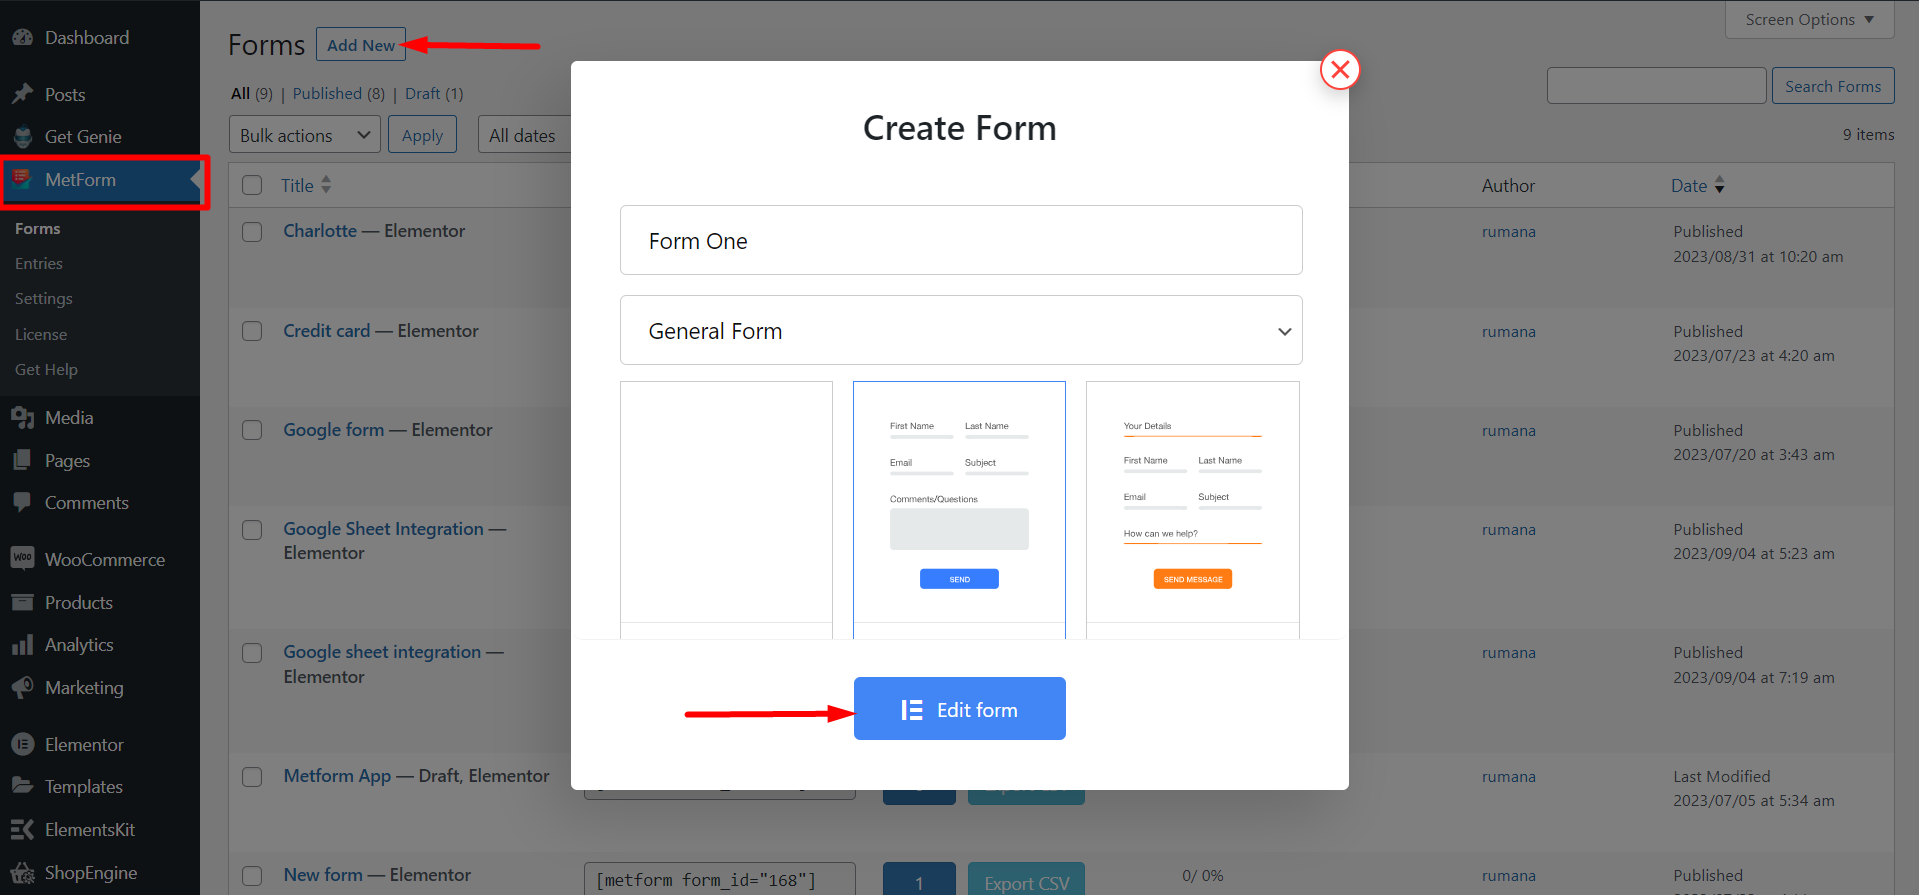 Creating new forms with MetForm